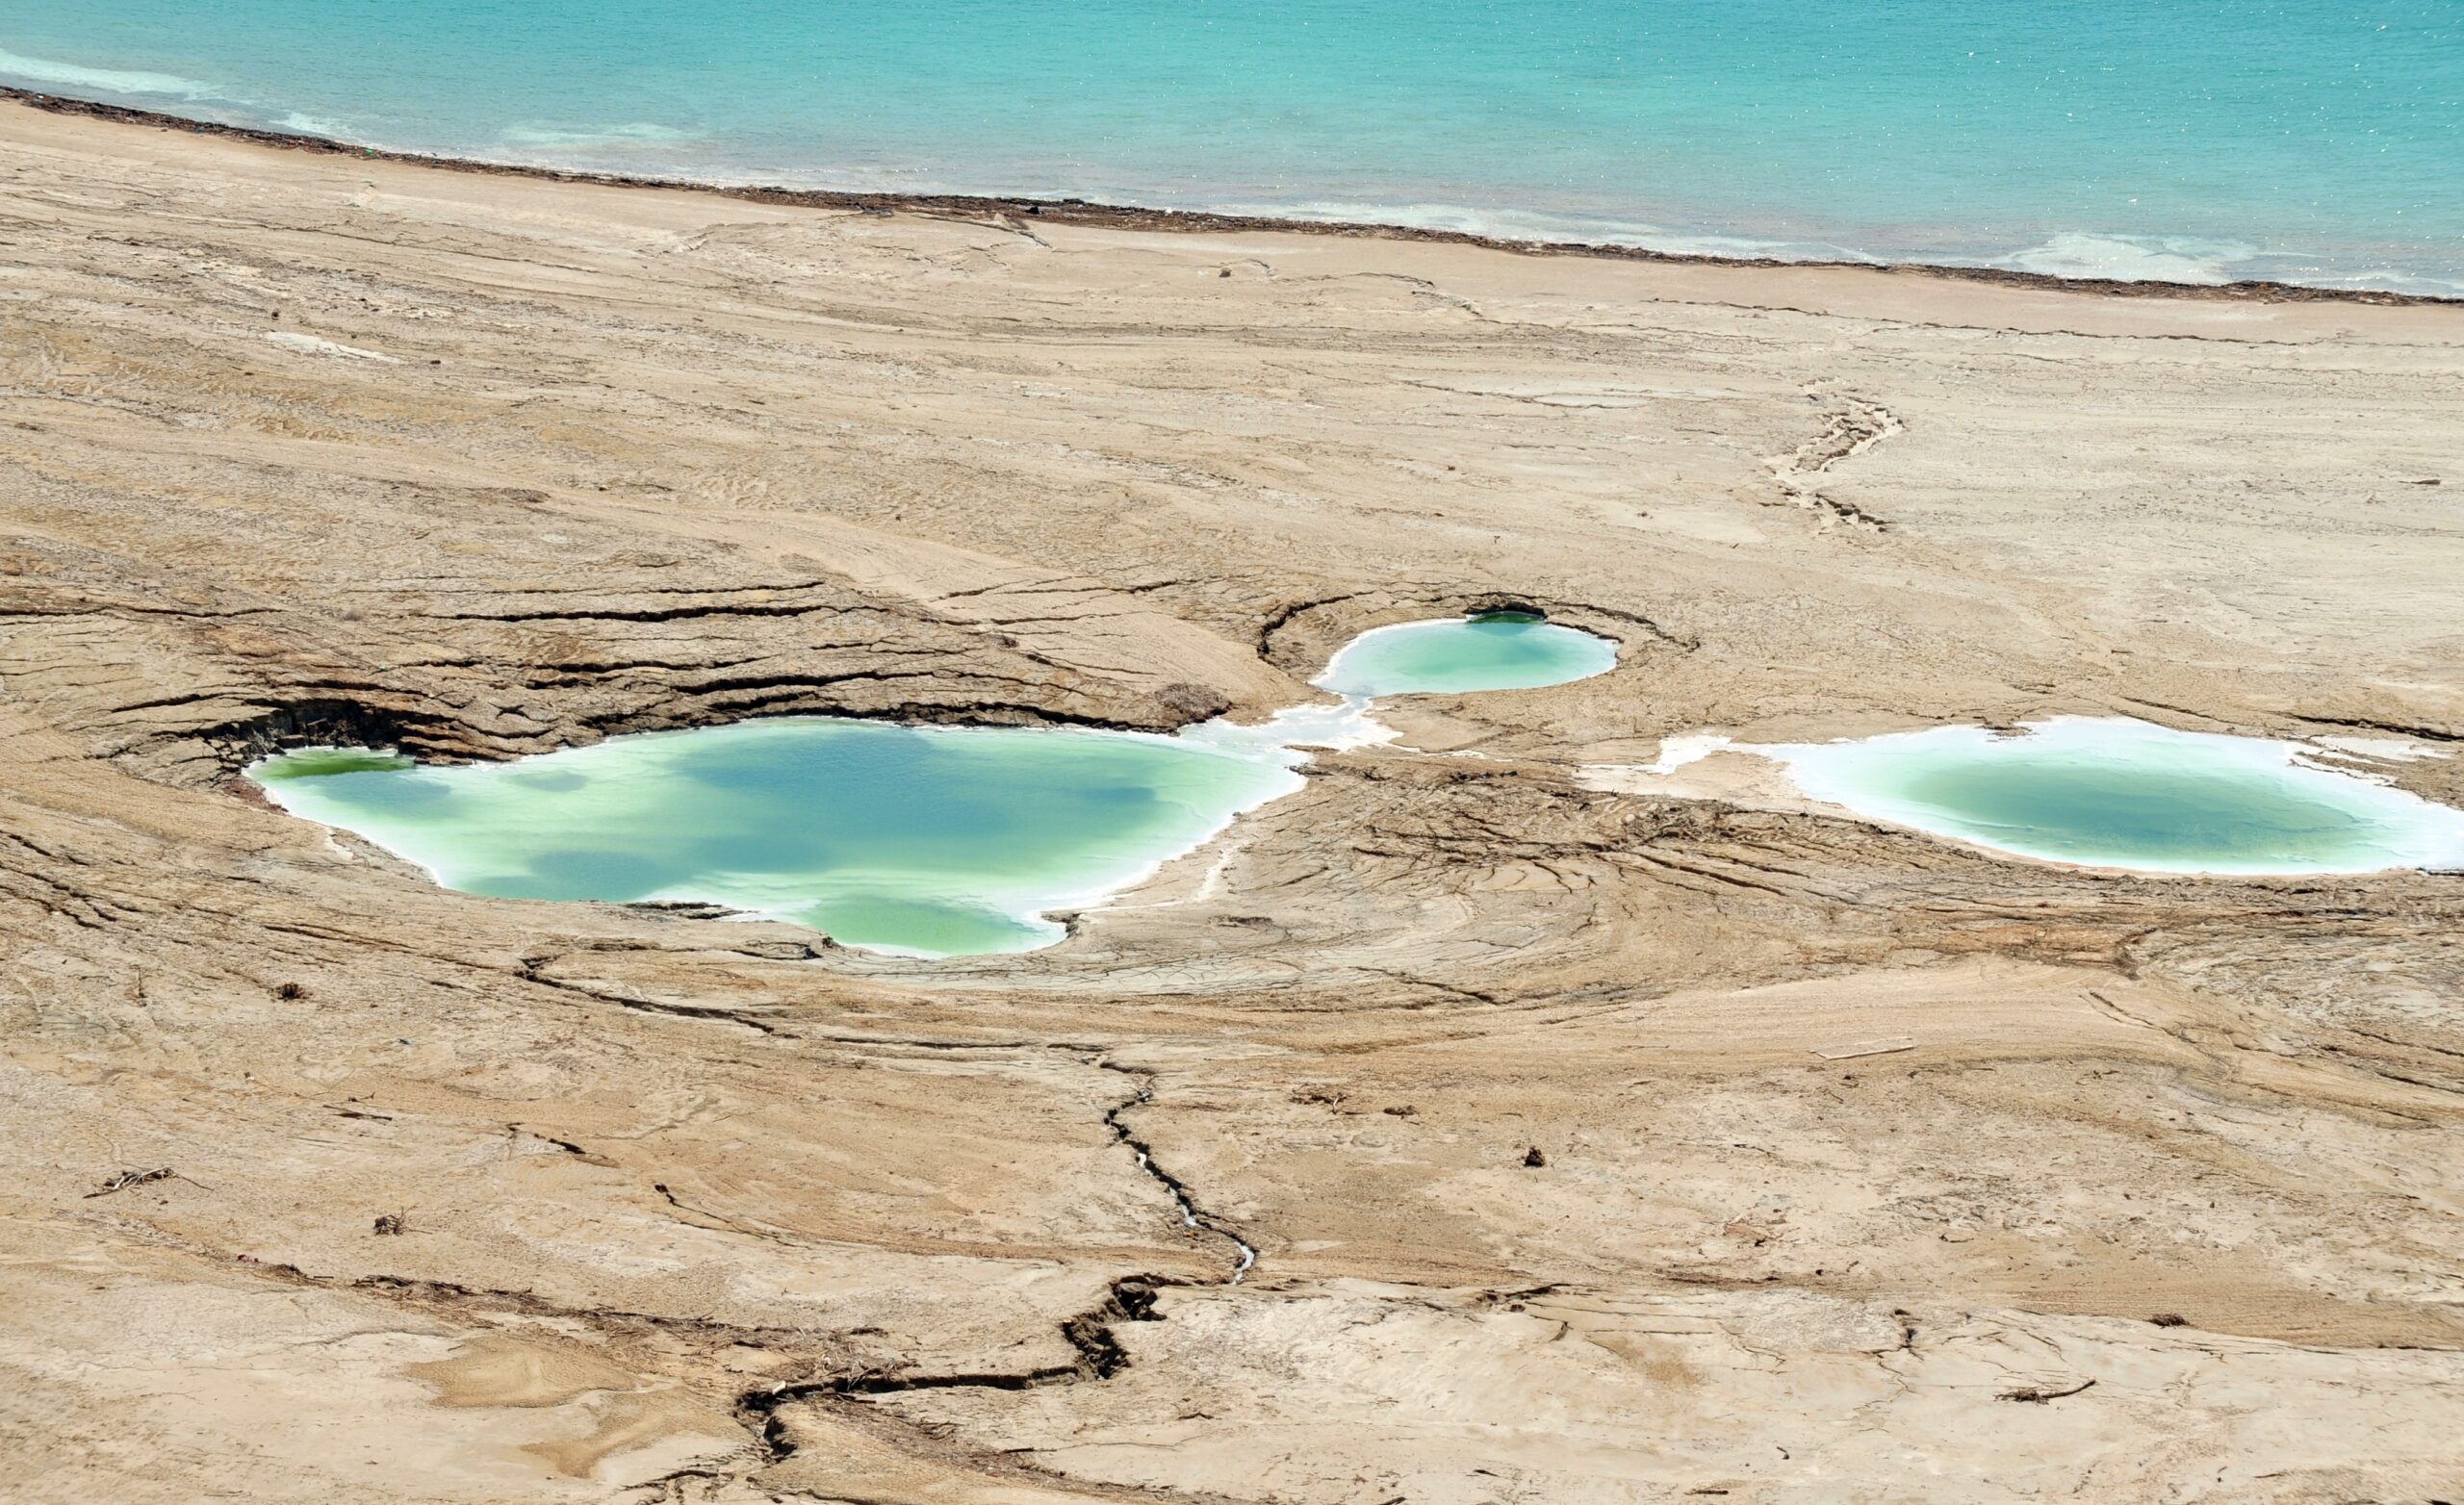 The Dead Sea's shore has been receding over the years and causing sink holes along its shore. (Shutterstock.com)